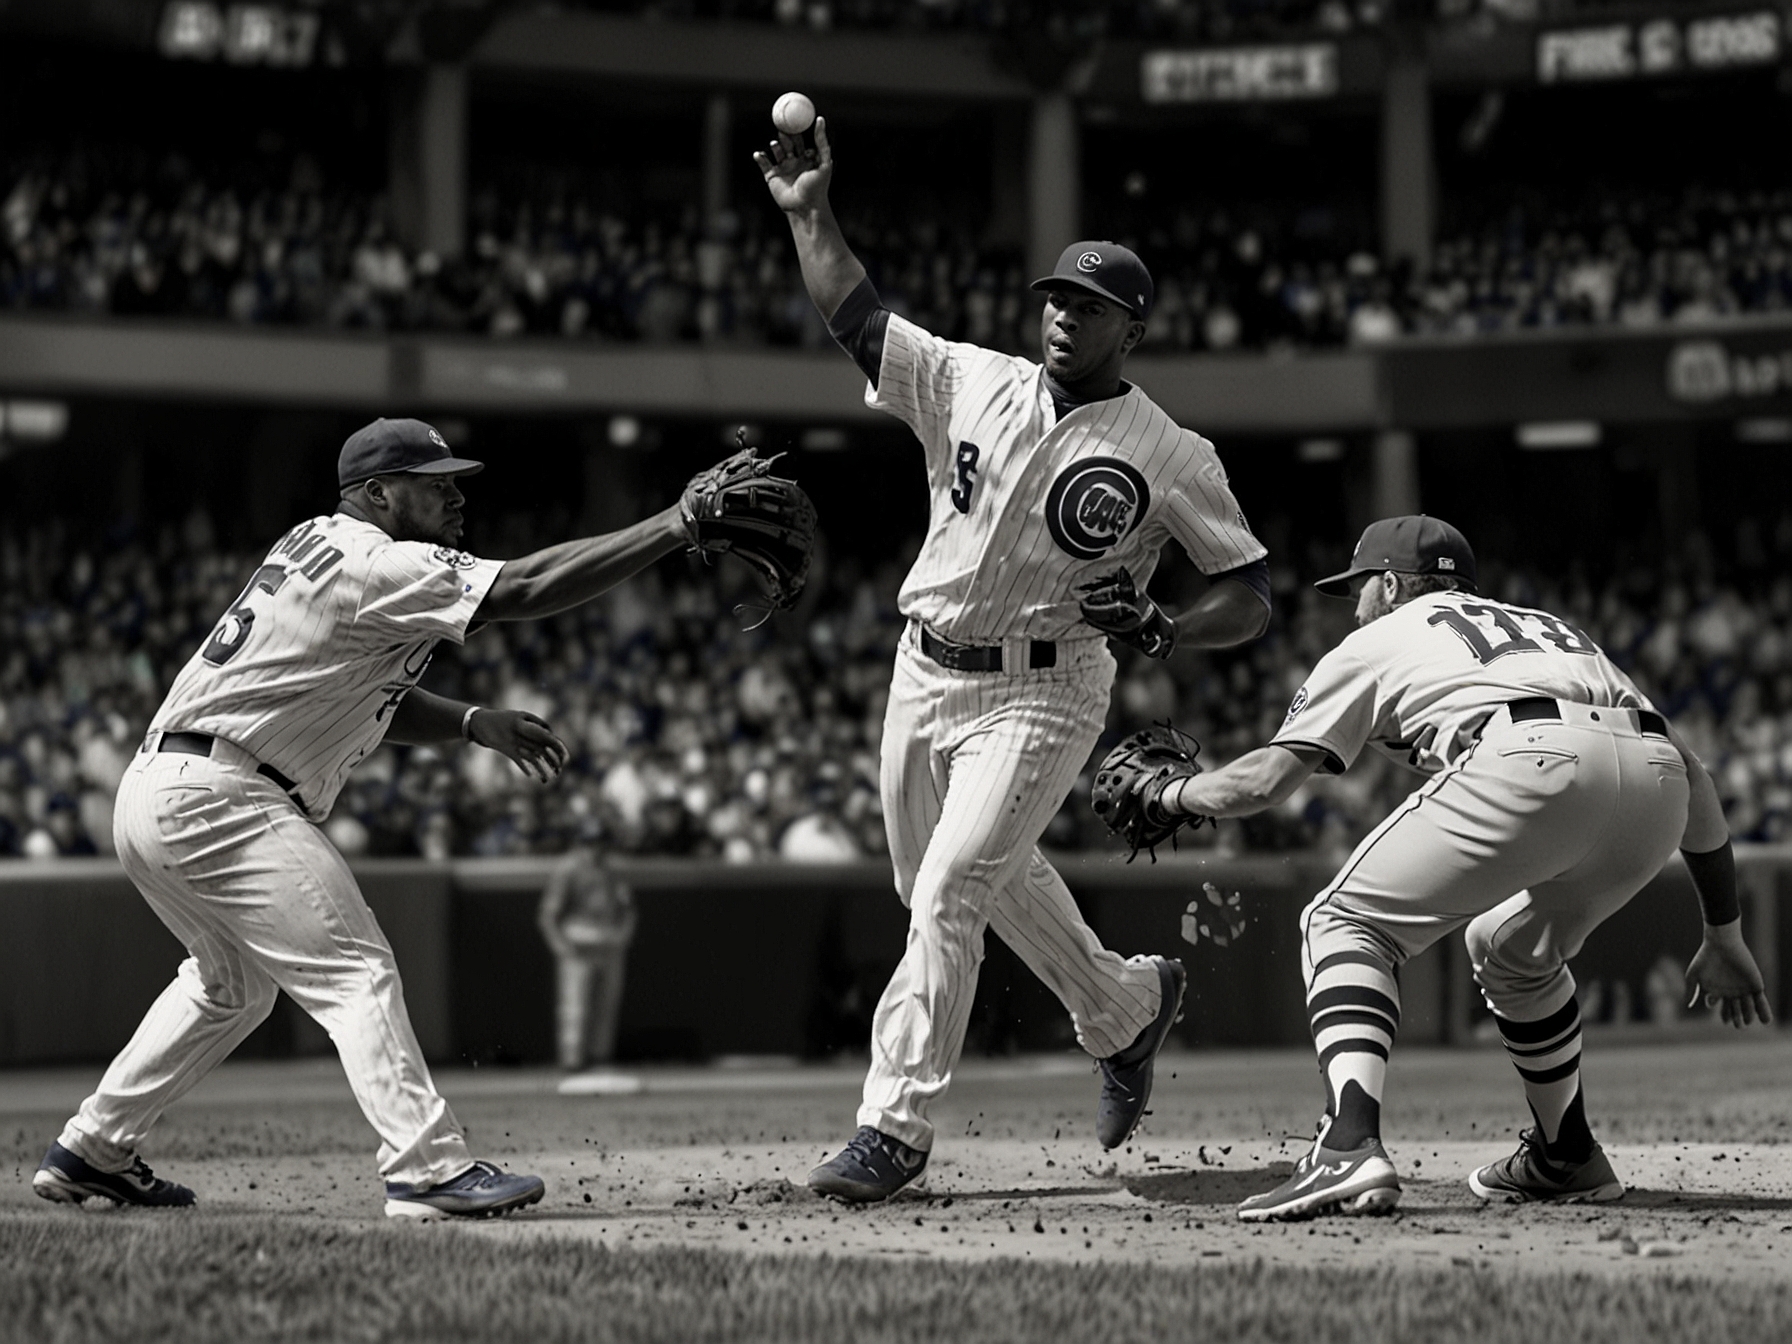 Chicago Cubs' defenders in action as they successfully hold off the Milwaukee Brewers in the final innings, showcasing exceptional pitching and sharp defensive plays to secure the win.